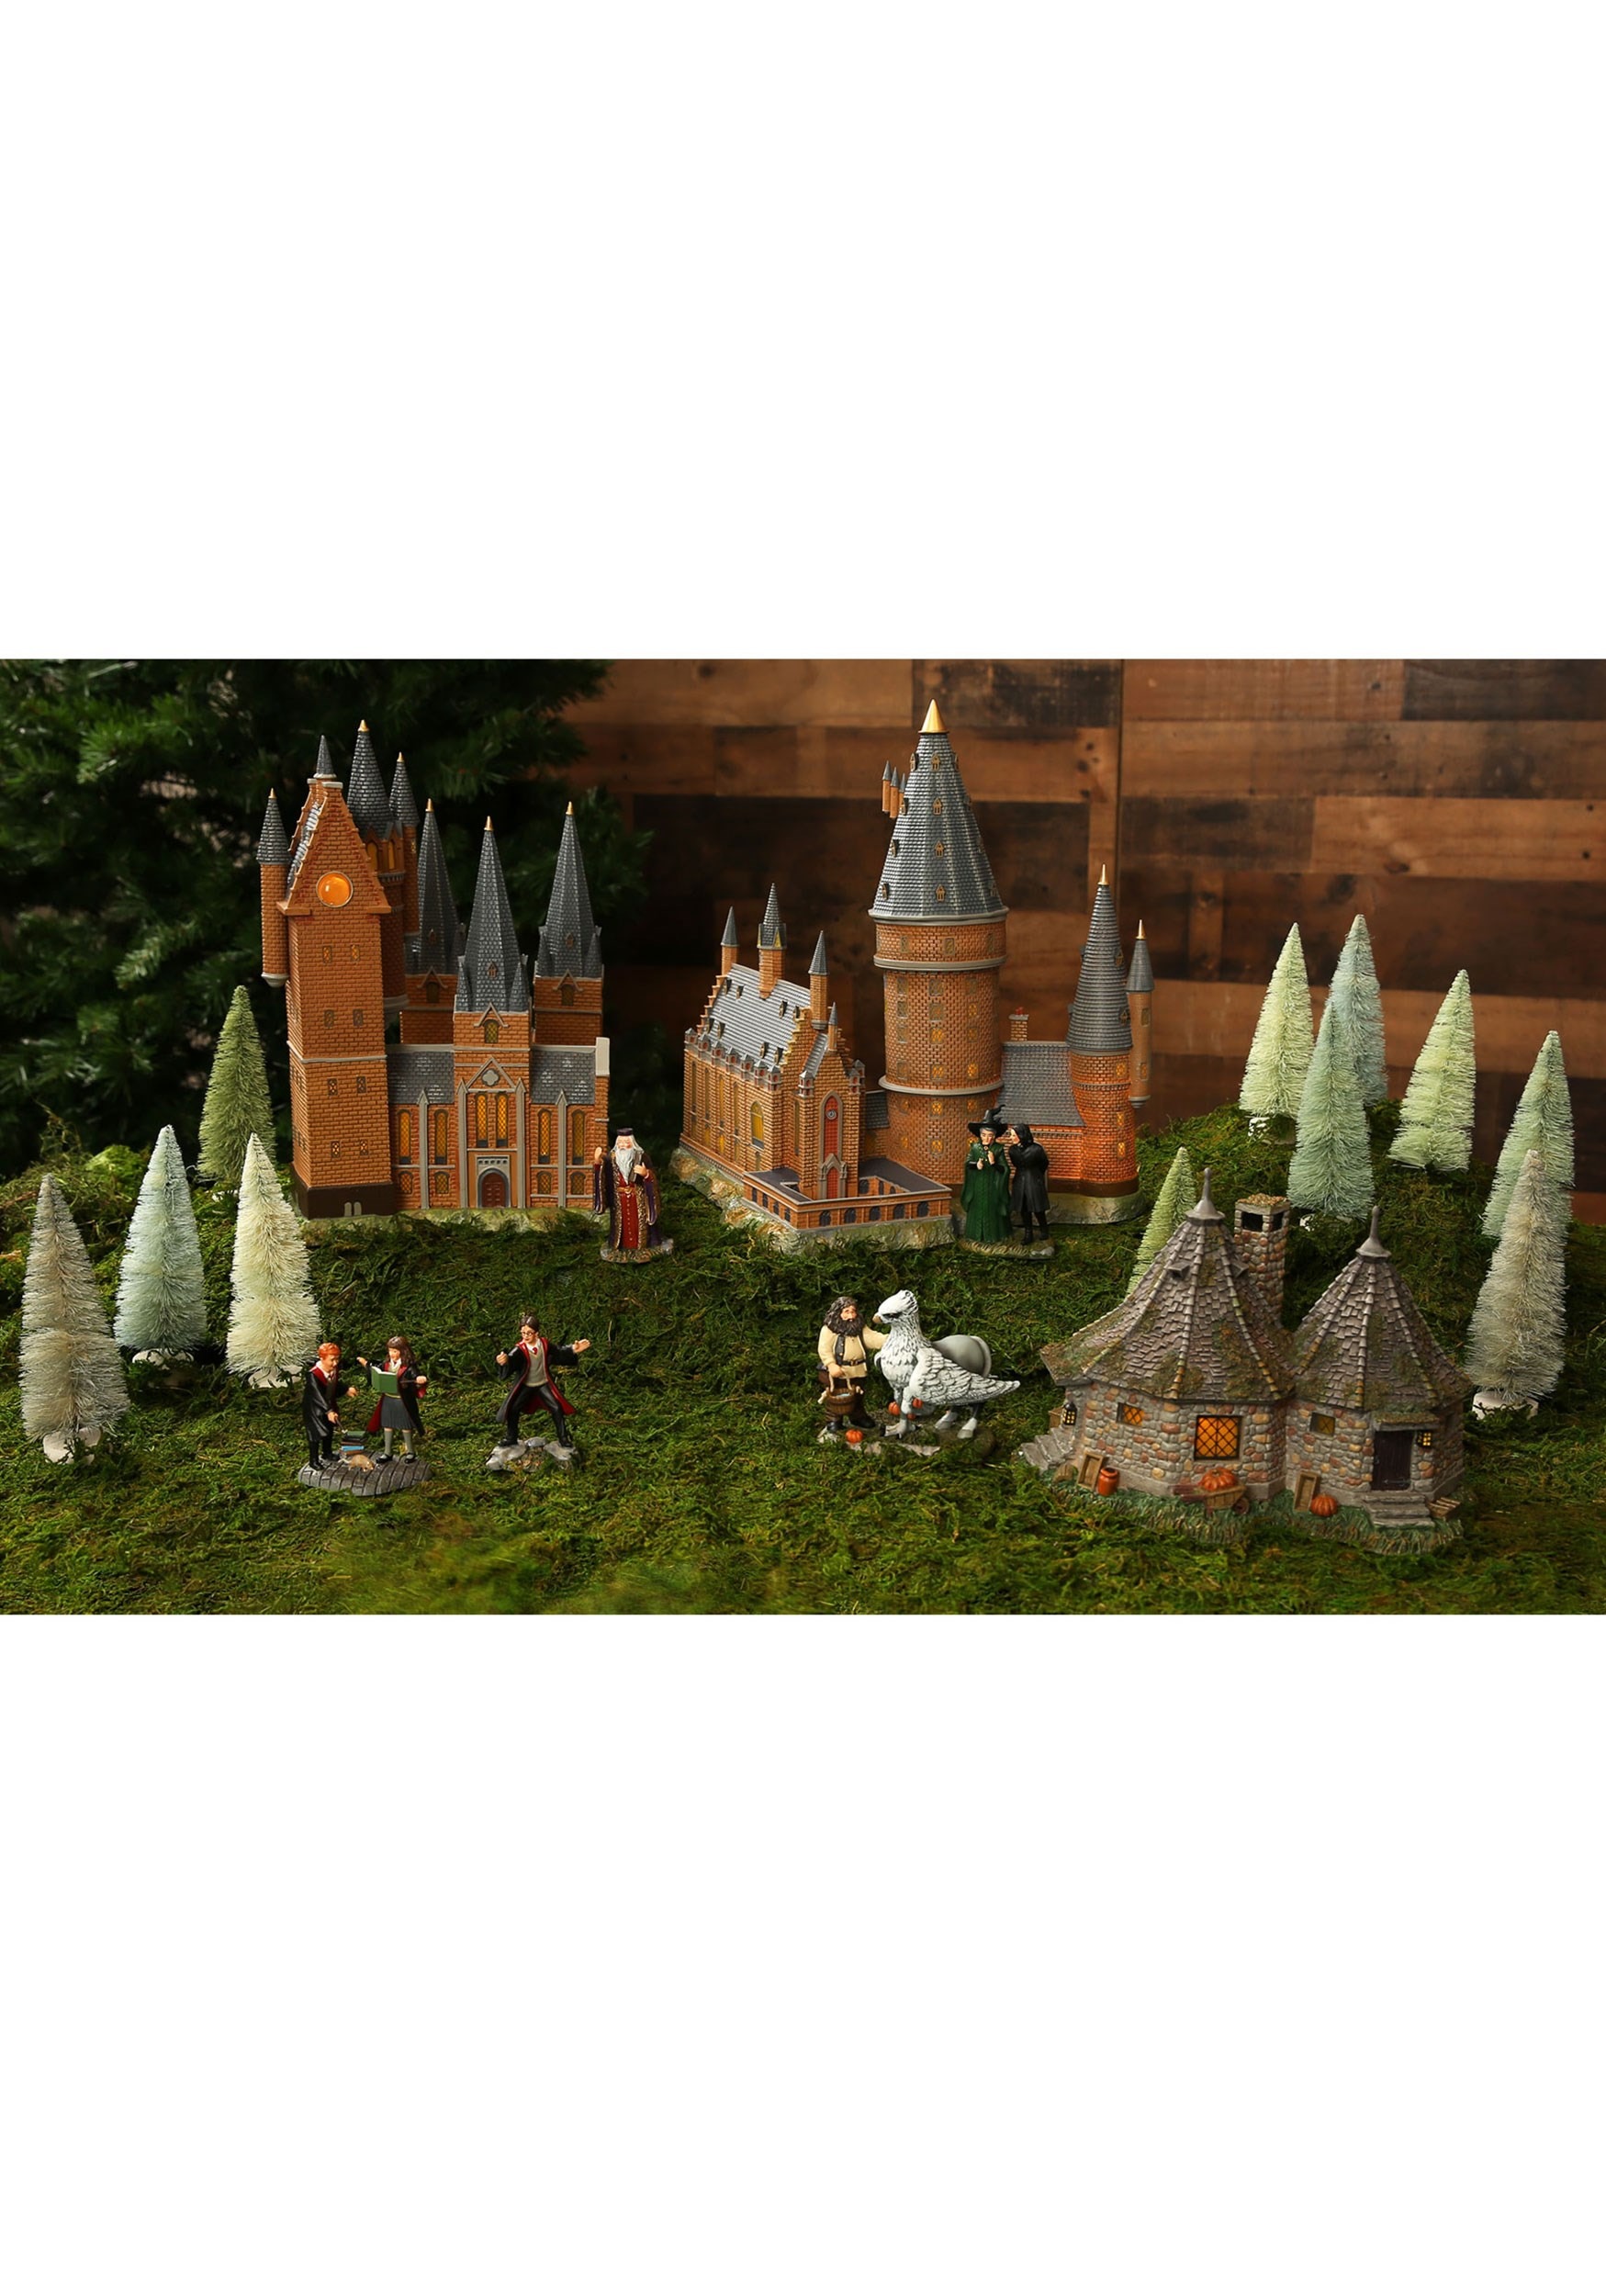 The COMPLETE Harry Potter Village by Department 56